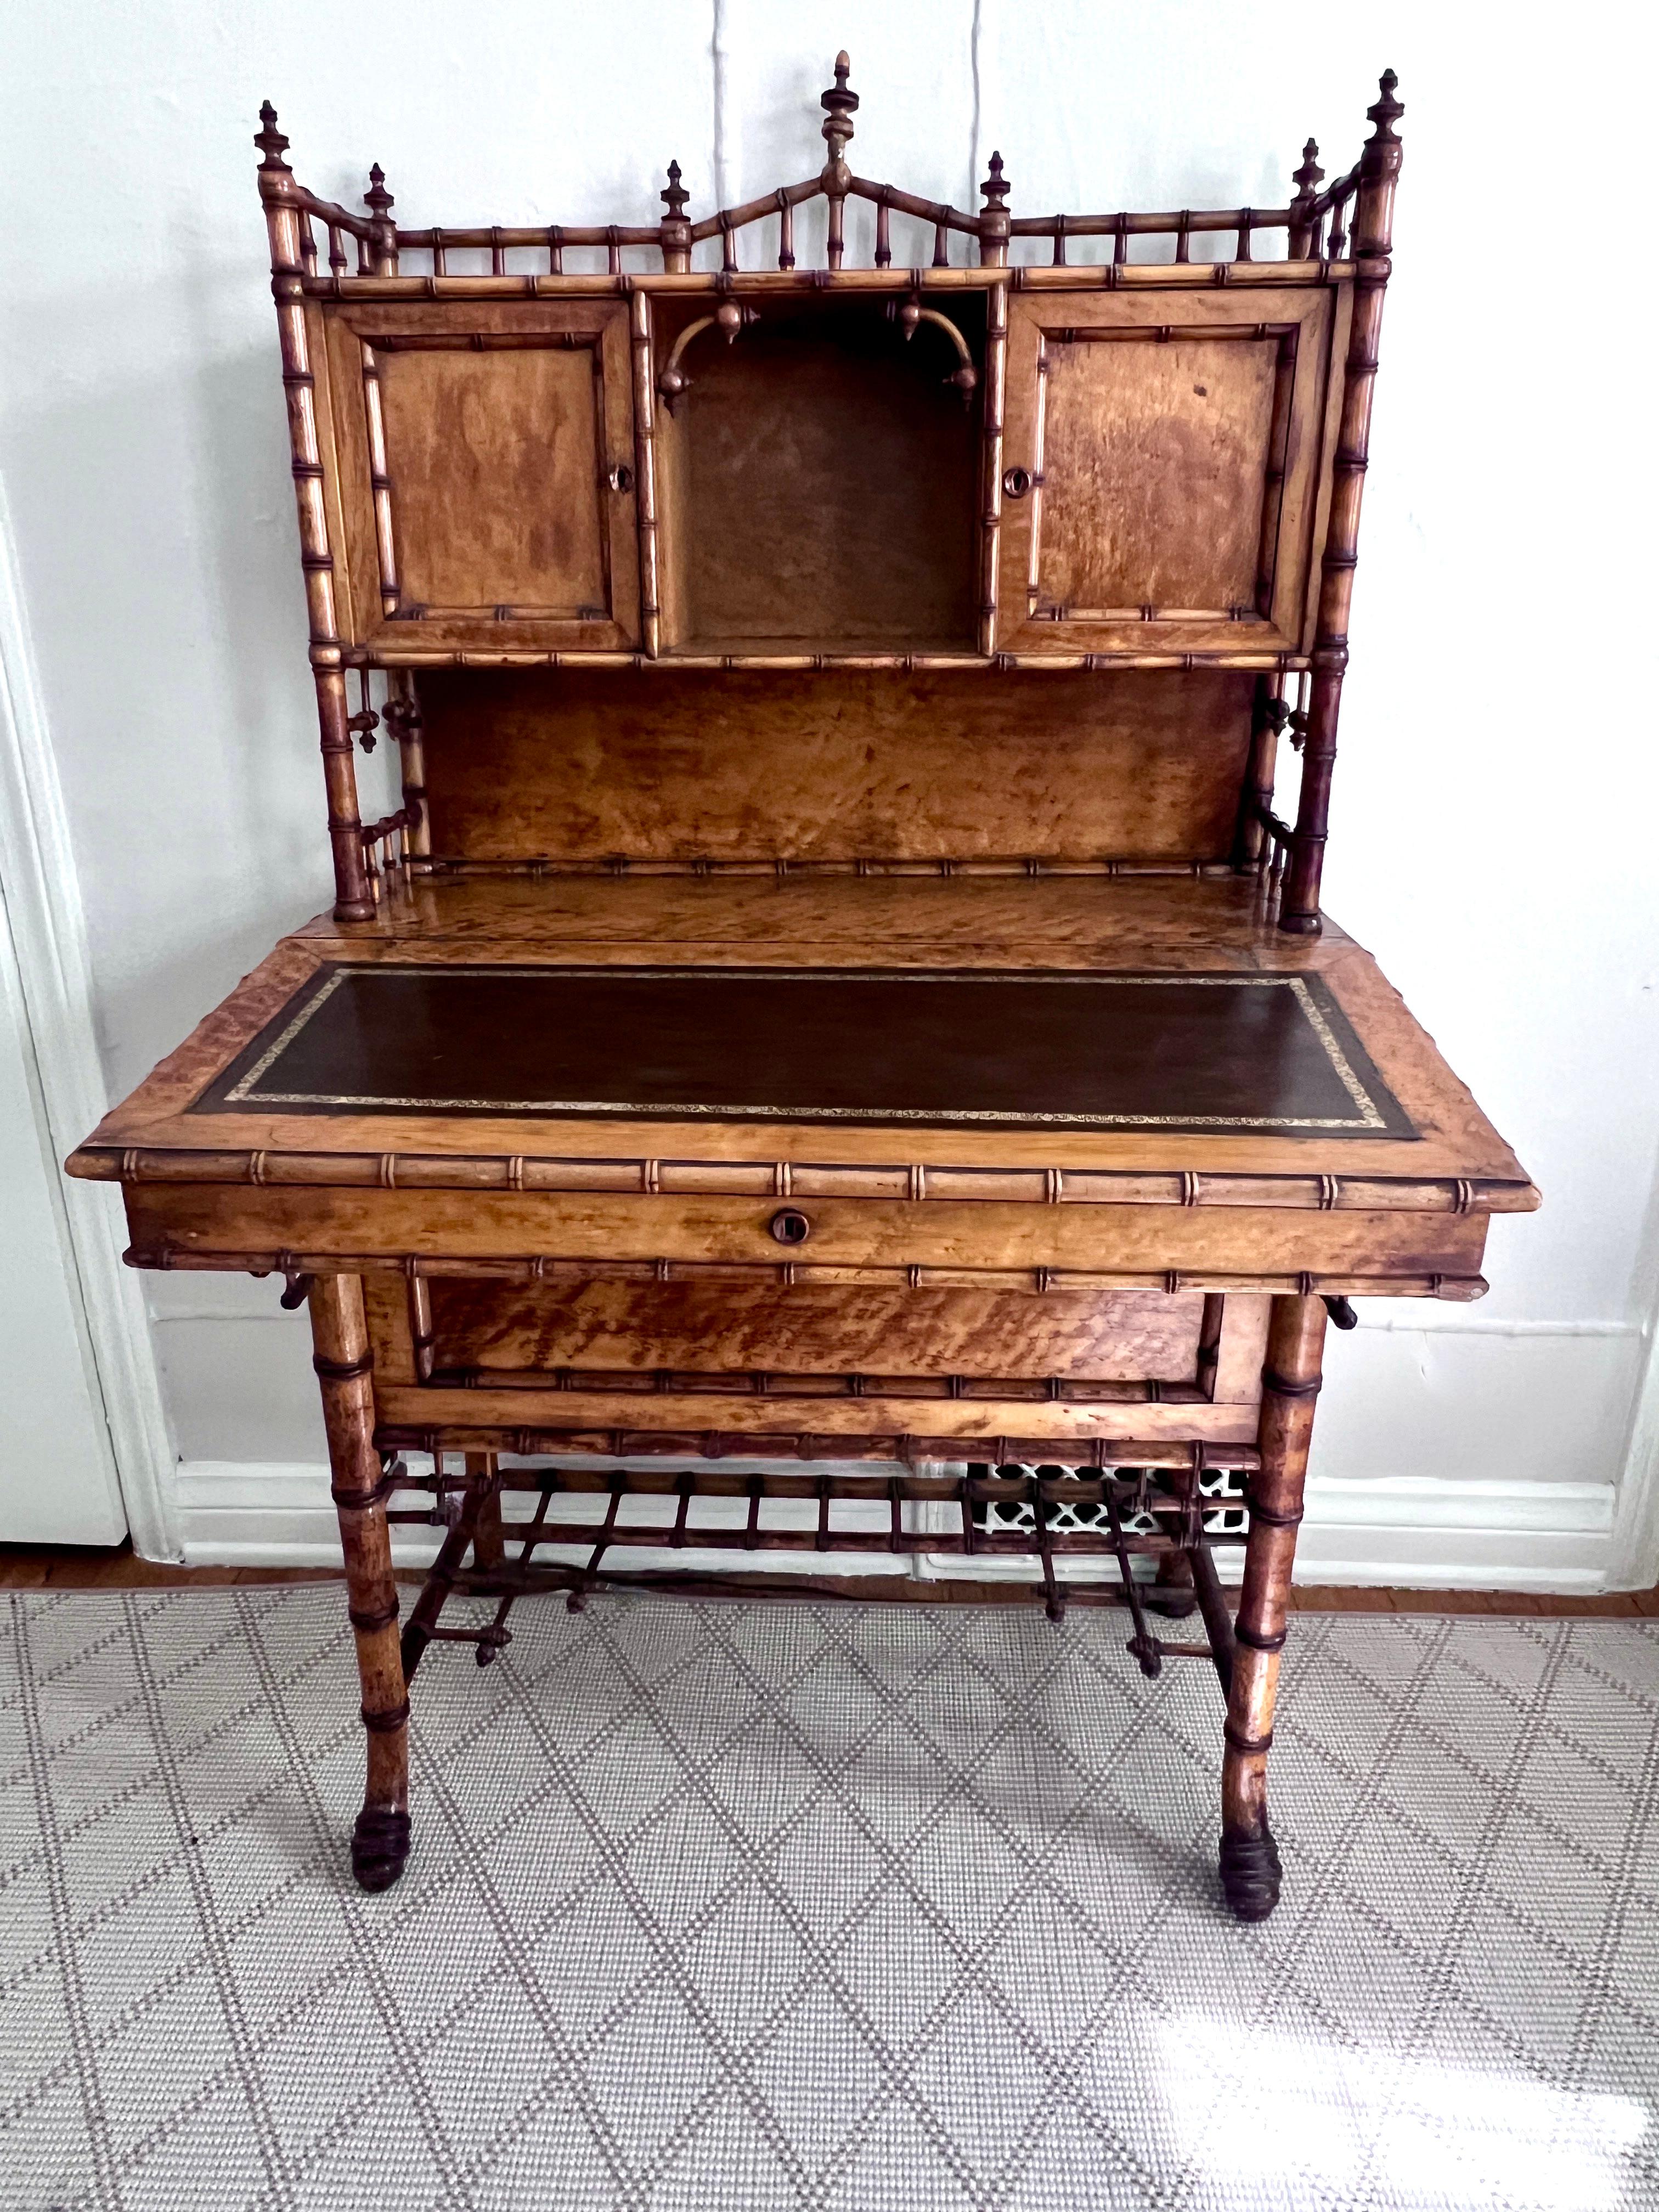 Stunning Hand Crafted English Chinese Chippendale Bamboo Secretary.

This handsome and special Secretary has two top facing doors and a Middle 